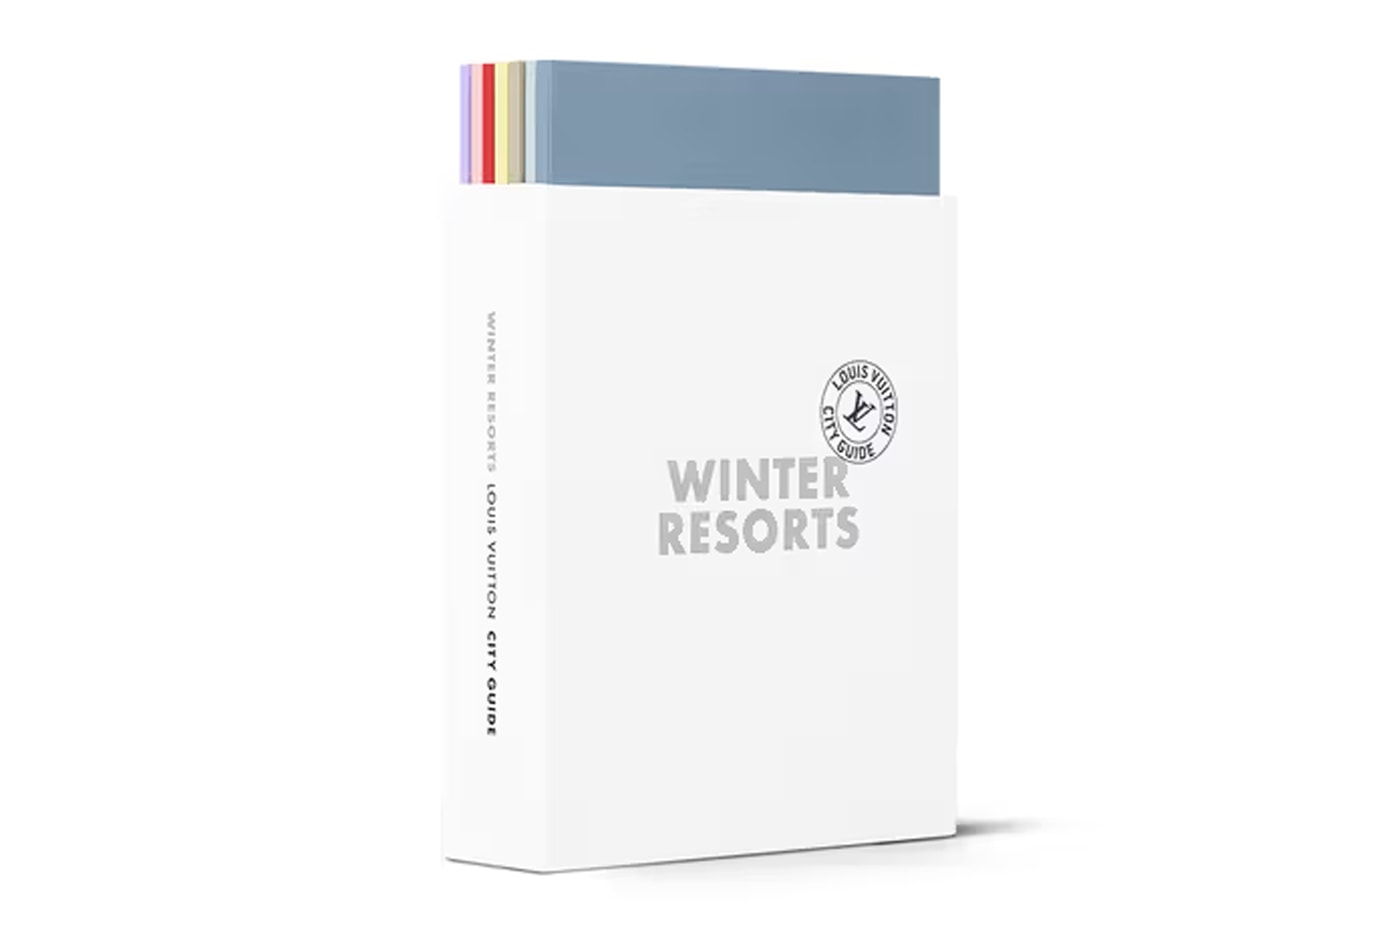 Louis Vuitton Hits the Slopes for Winter Resorts City Guide Box Set Courchevel, Cortina d'Ampezzo, Aspen, Gstaad, St. Moritz and – for the first time – Kitzbühel and Crans-Montana, curated by illustrators Tom Haugomat, Sarah Mazzetti, Jochen Gerner, Simon Bailly, Lisa Mouchet, Giacomo Nanni and Fanny Blanc image release link price colorado europe image design travel 